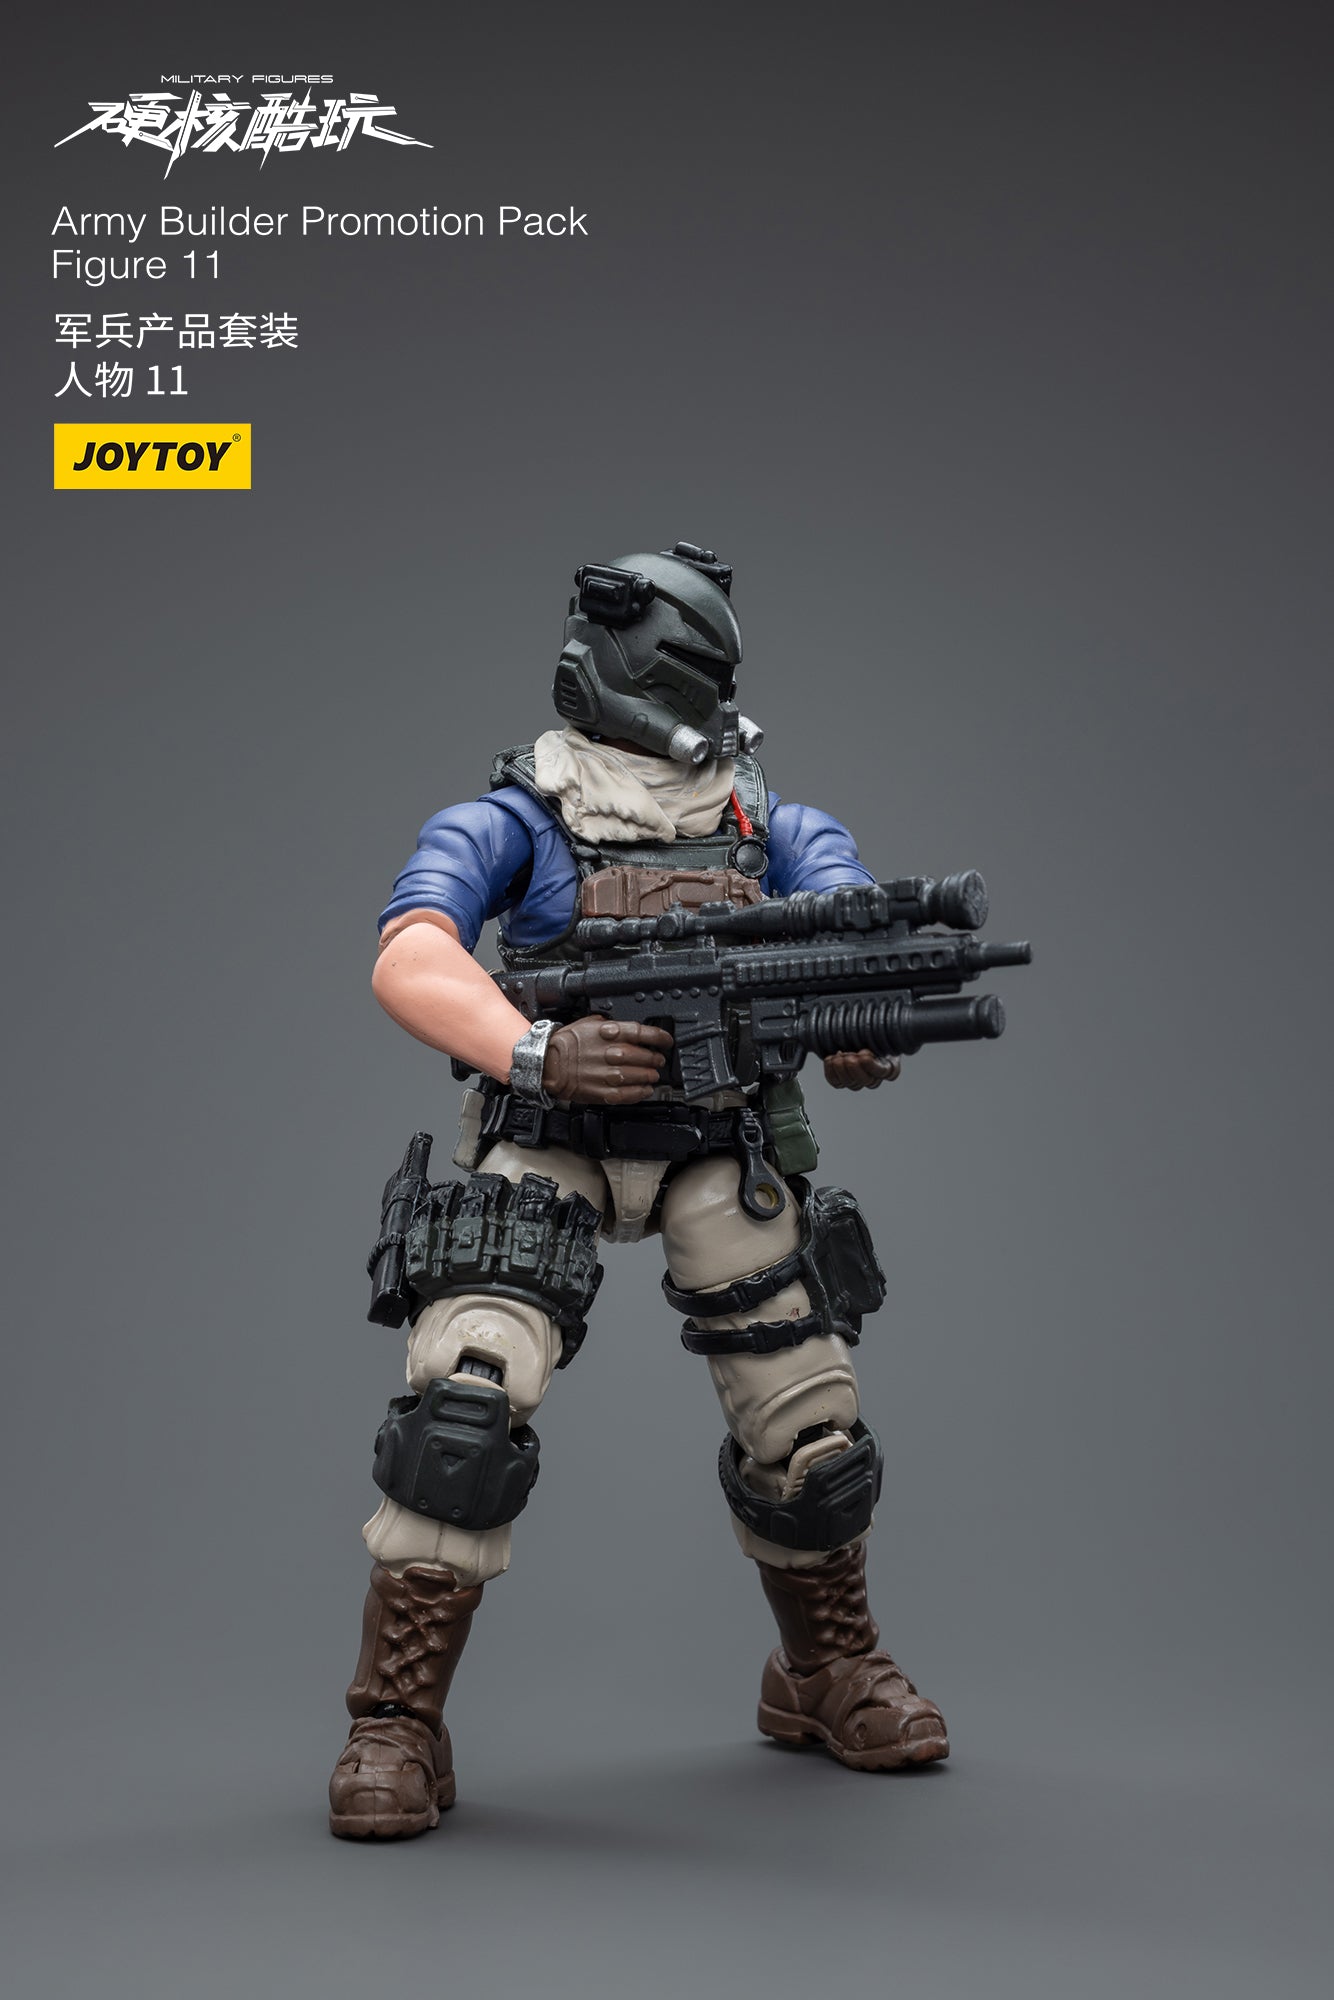 Army Builder Promotion Pack Figure 11 - Military Action Figure By JOYTOY